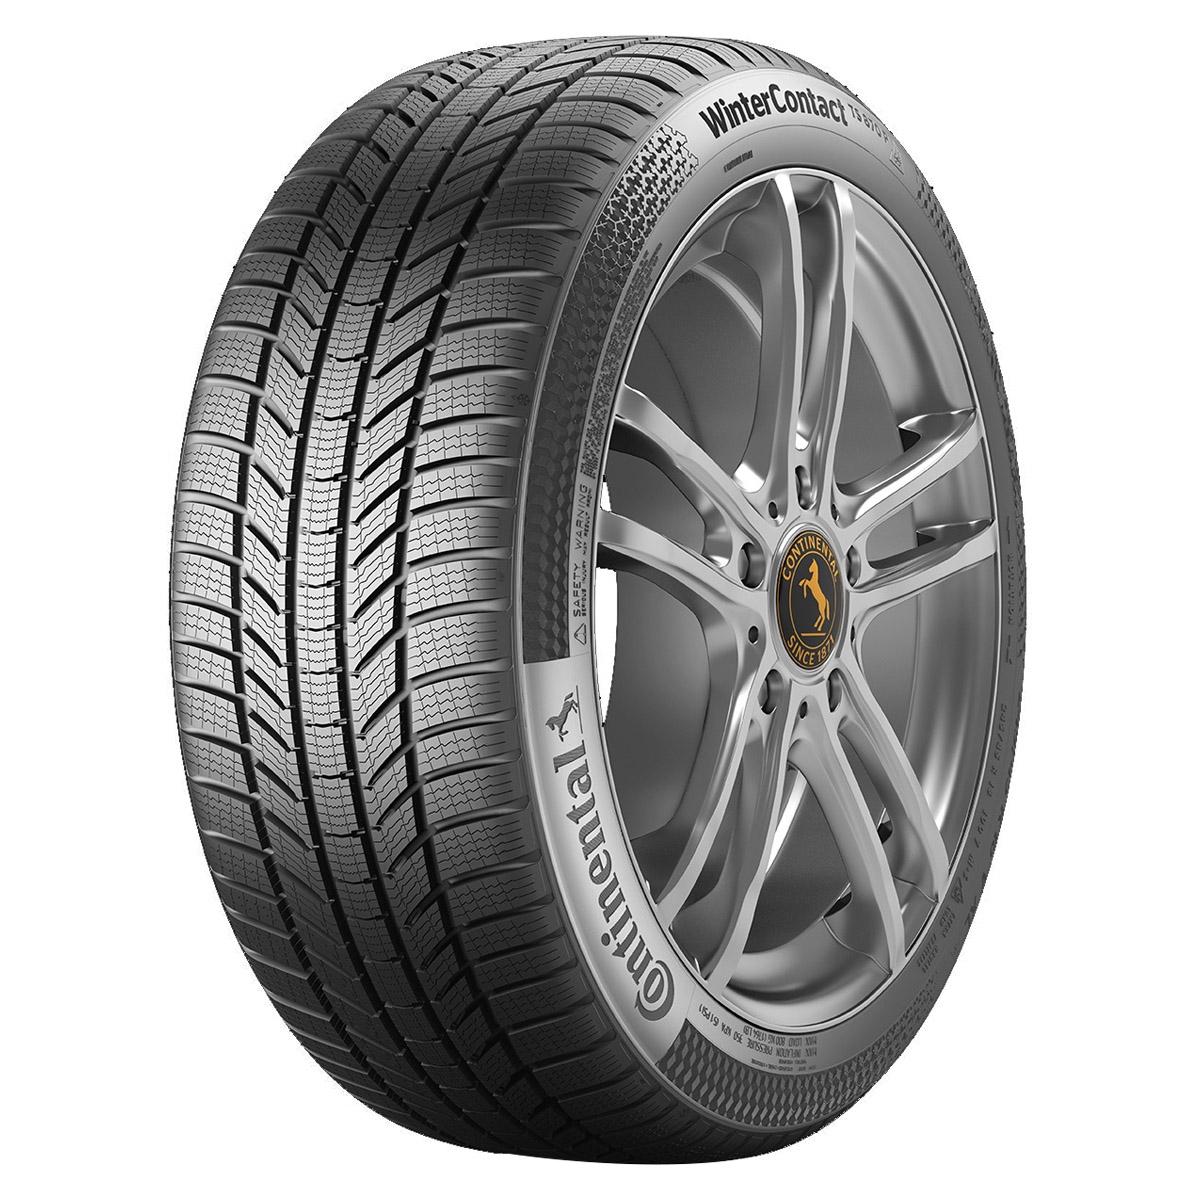 Anvelope iarna CONTINENTAL WINTER CONTACT TS870 P 225/55 R17 97H